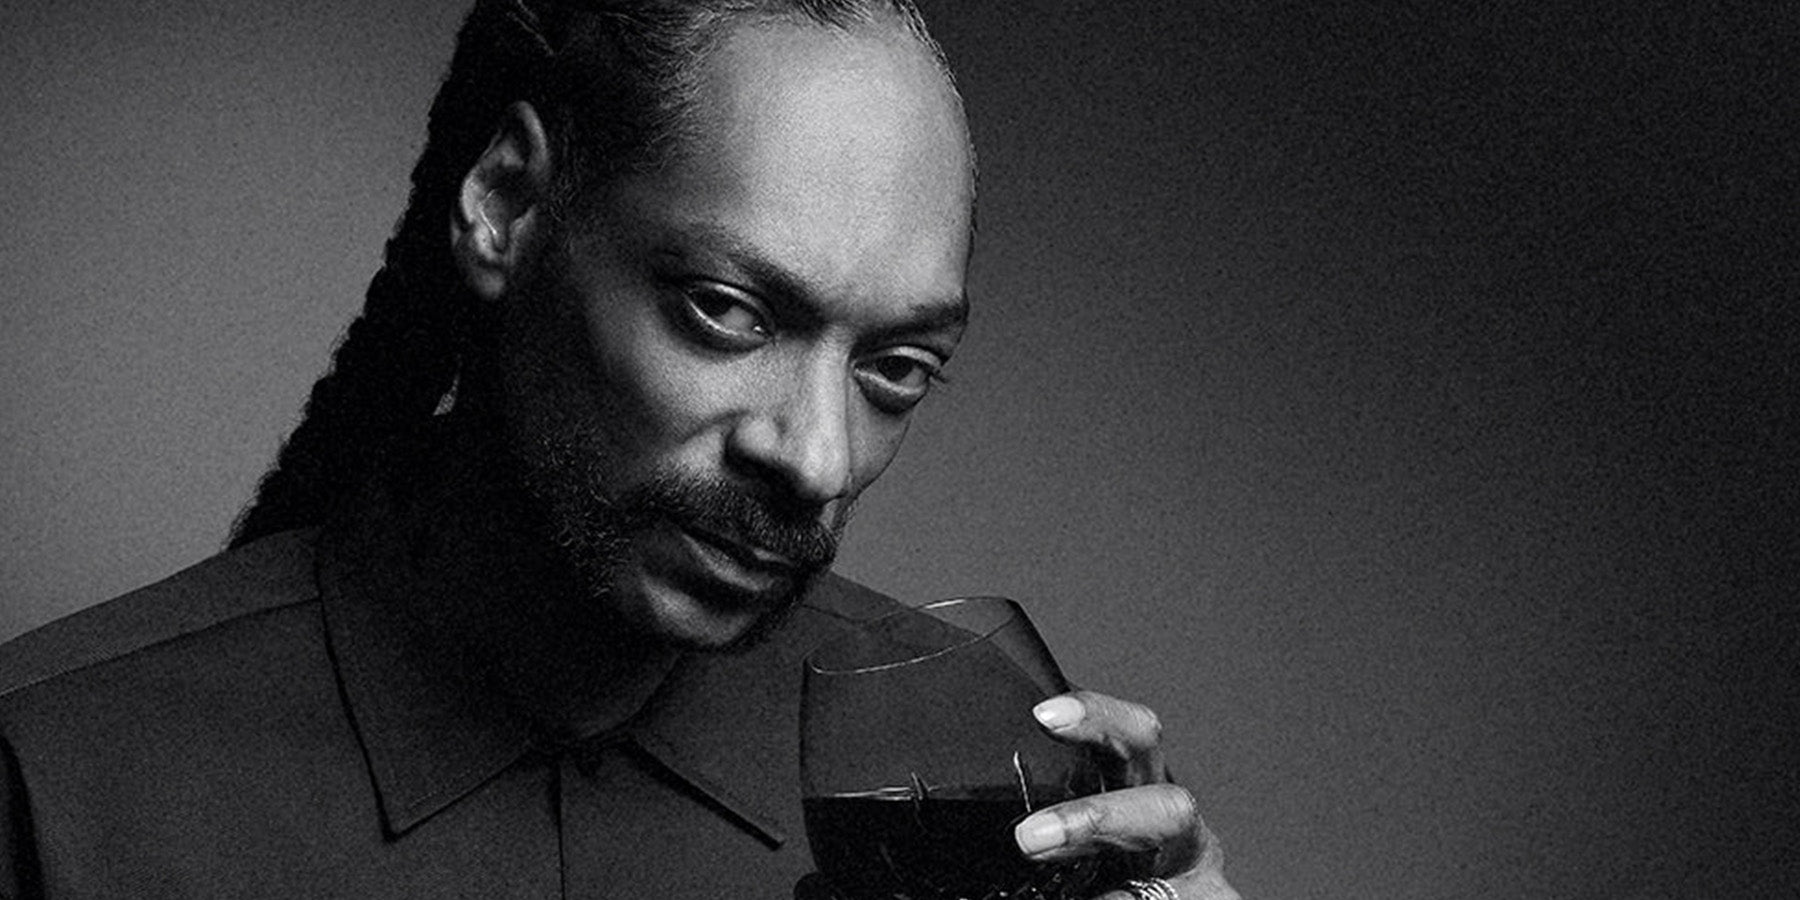 Snoop Dogg drinking Cali Red